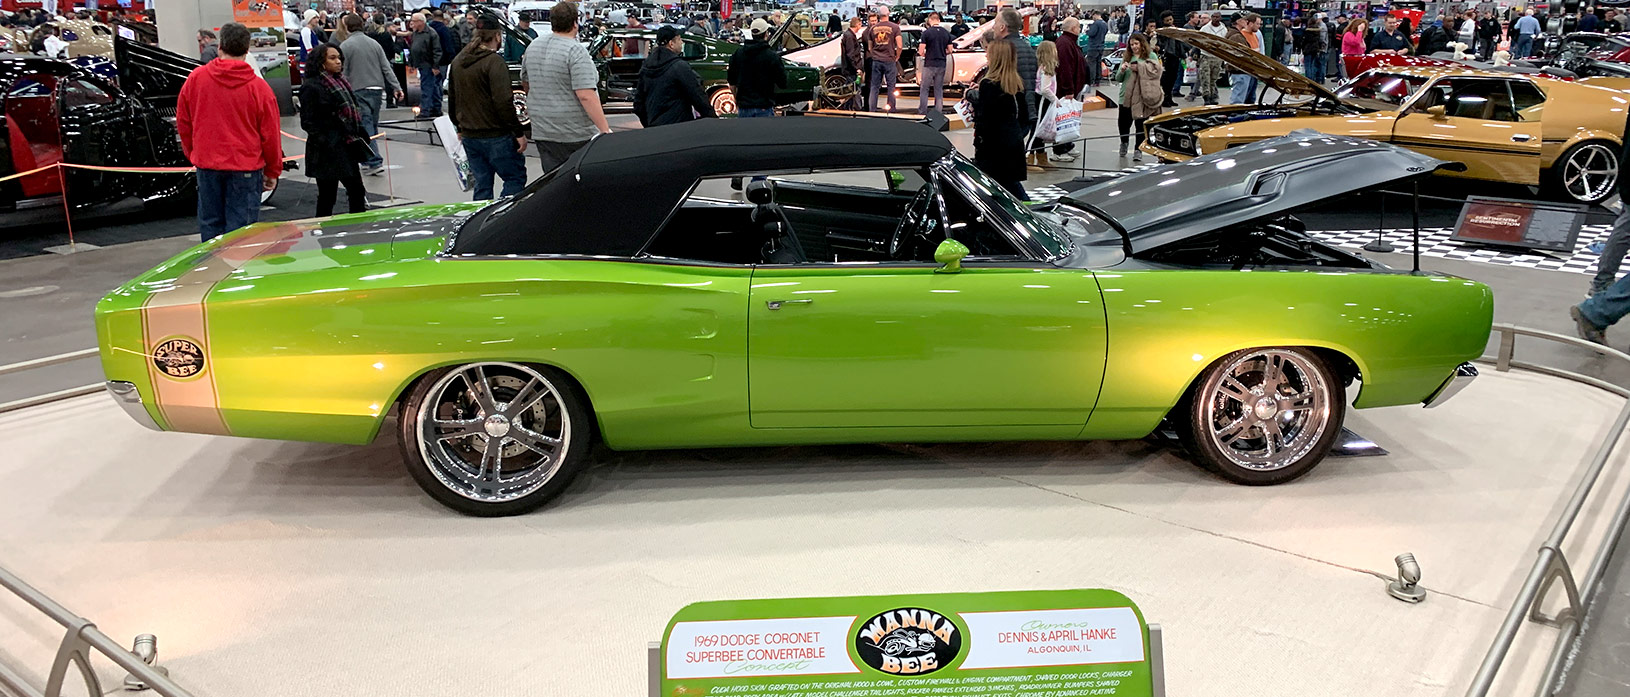 Winter Thaw: Detroit Autorama Packs Hot Horsepower and Sizzling Muscle